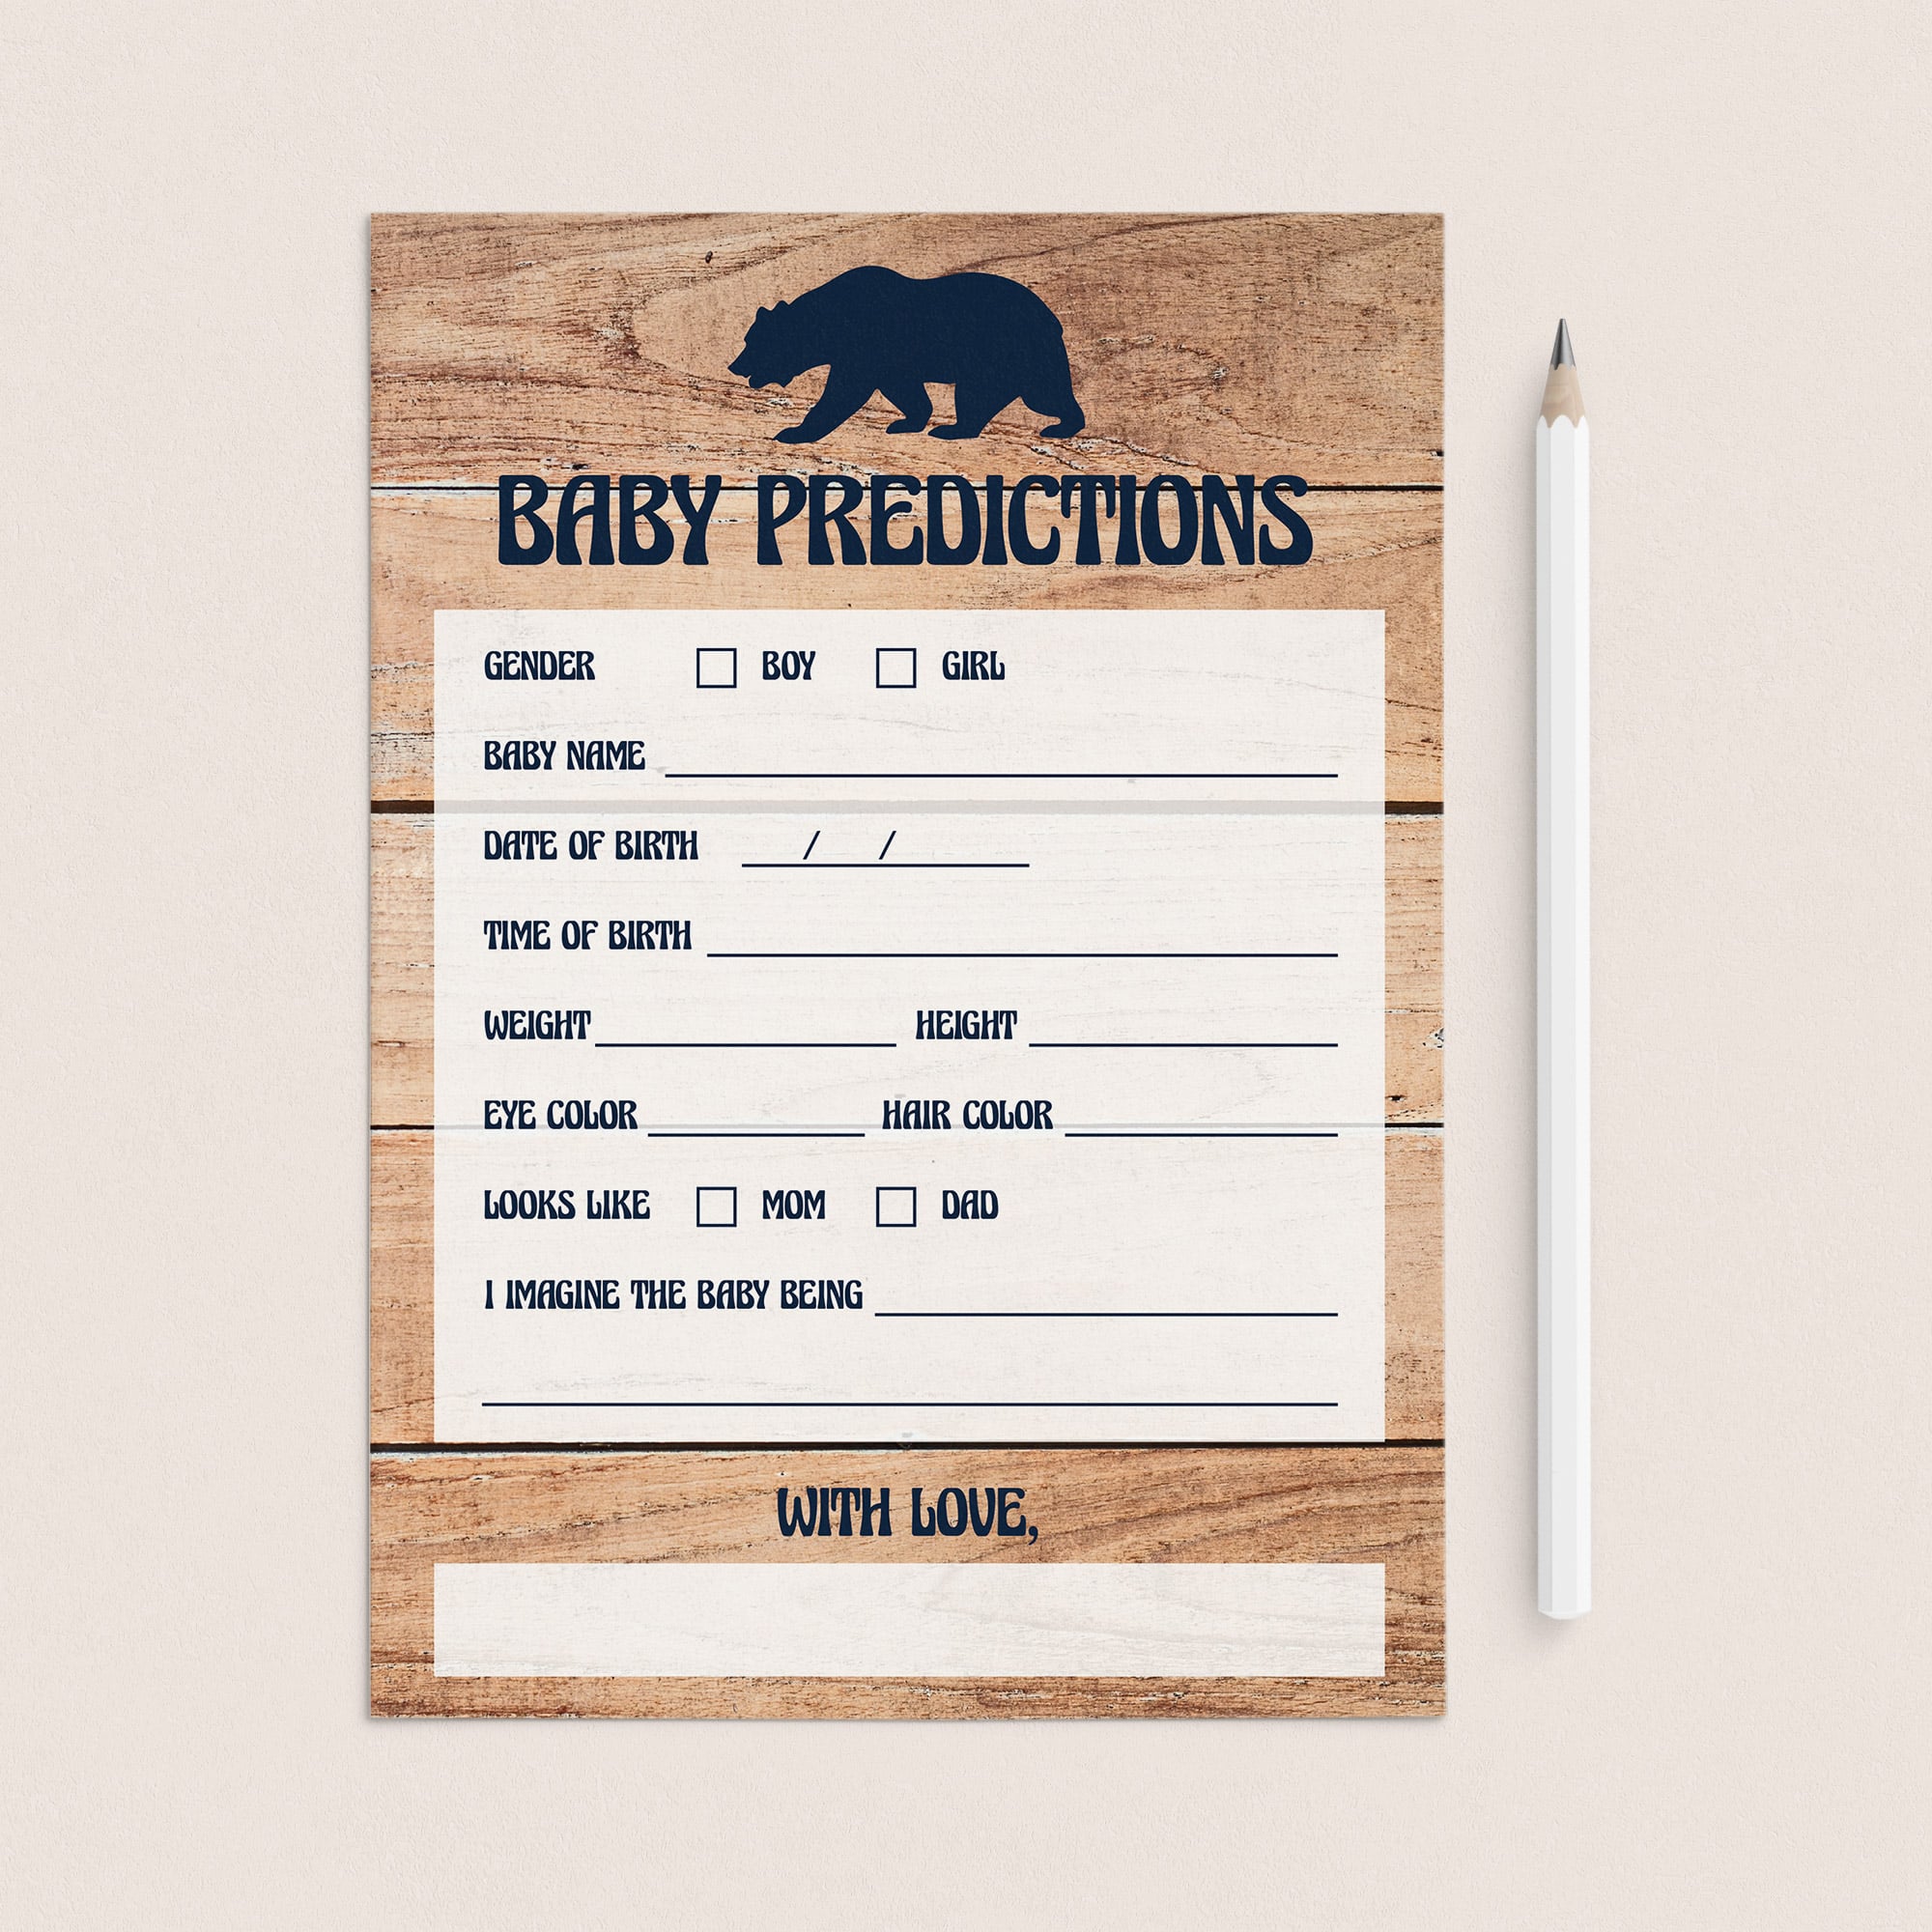 Bear baby shower prediction cards by LittleSizzle